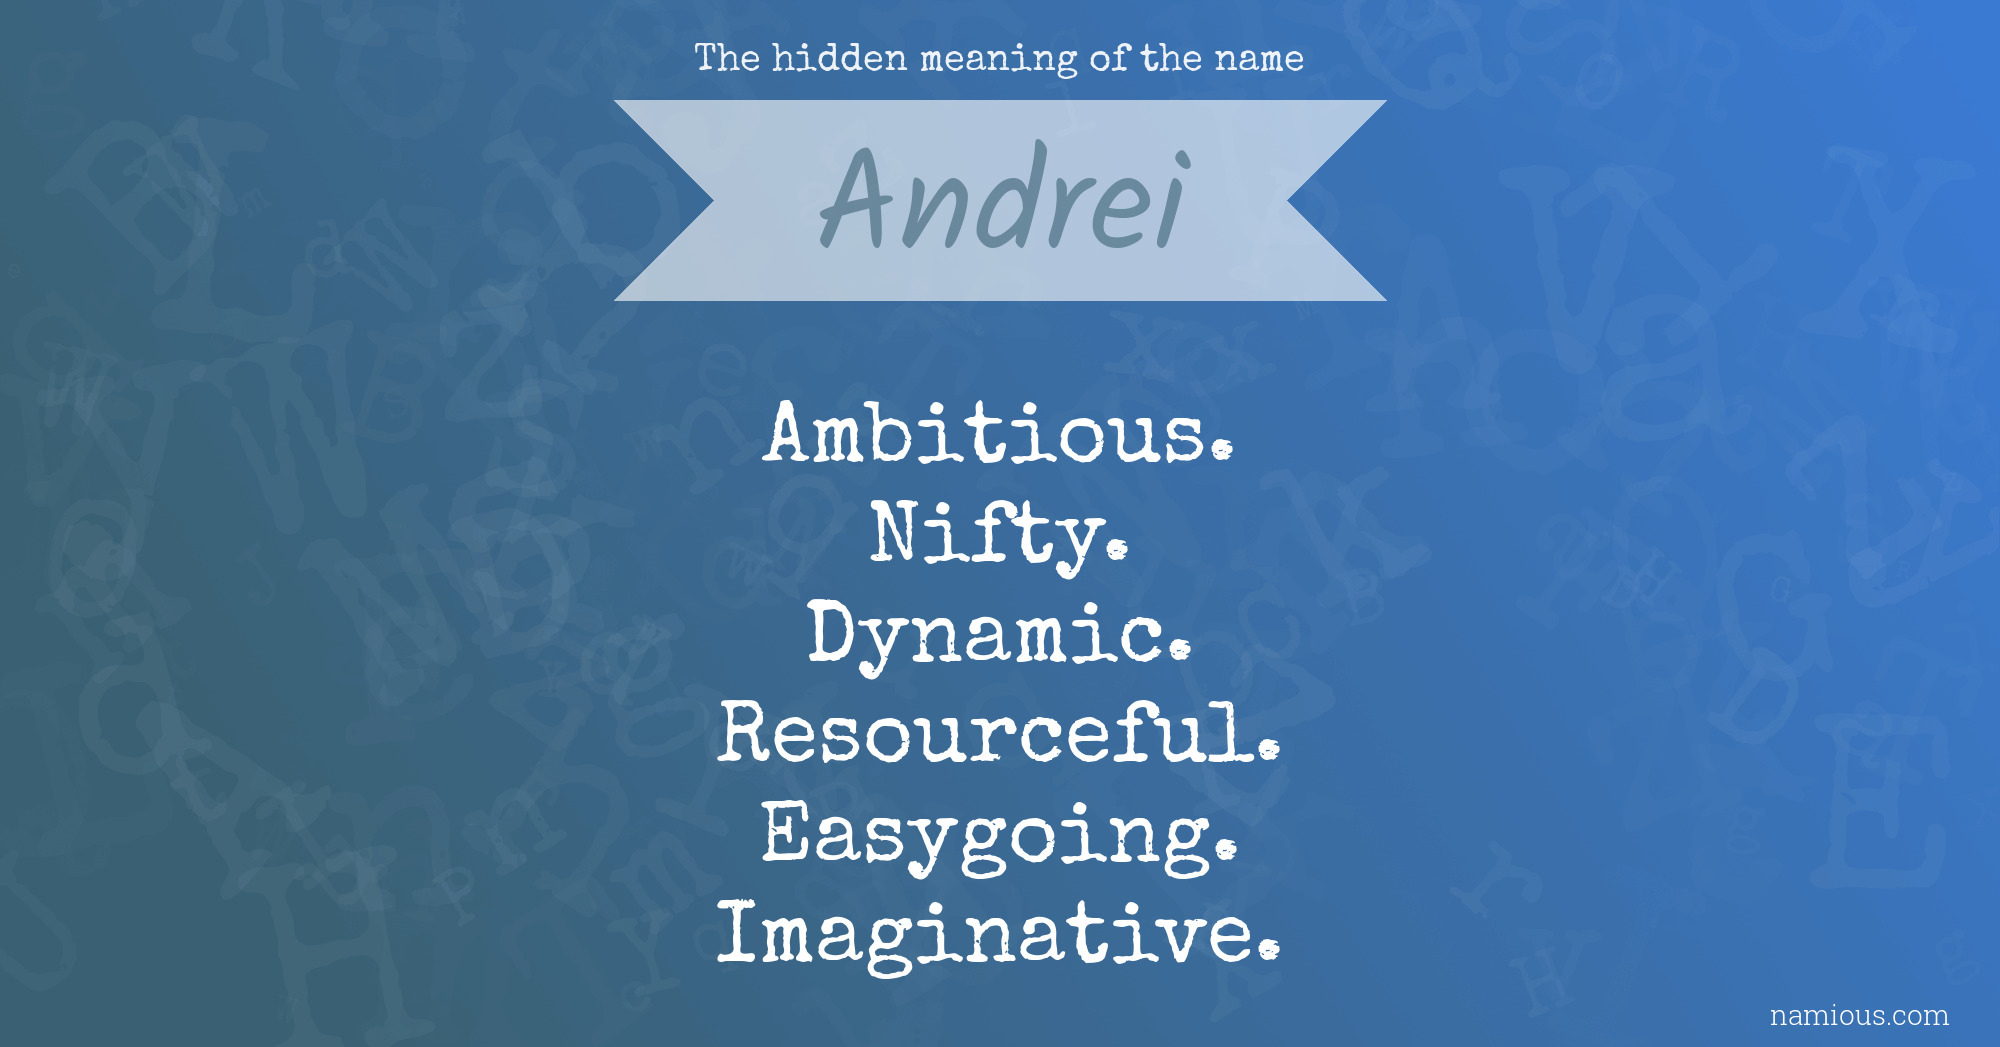 The hidden meaning of the name Andrei